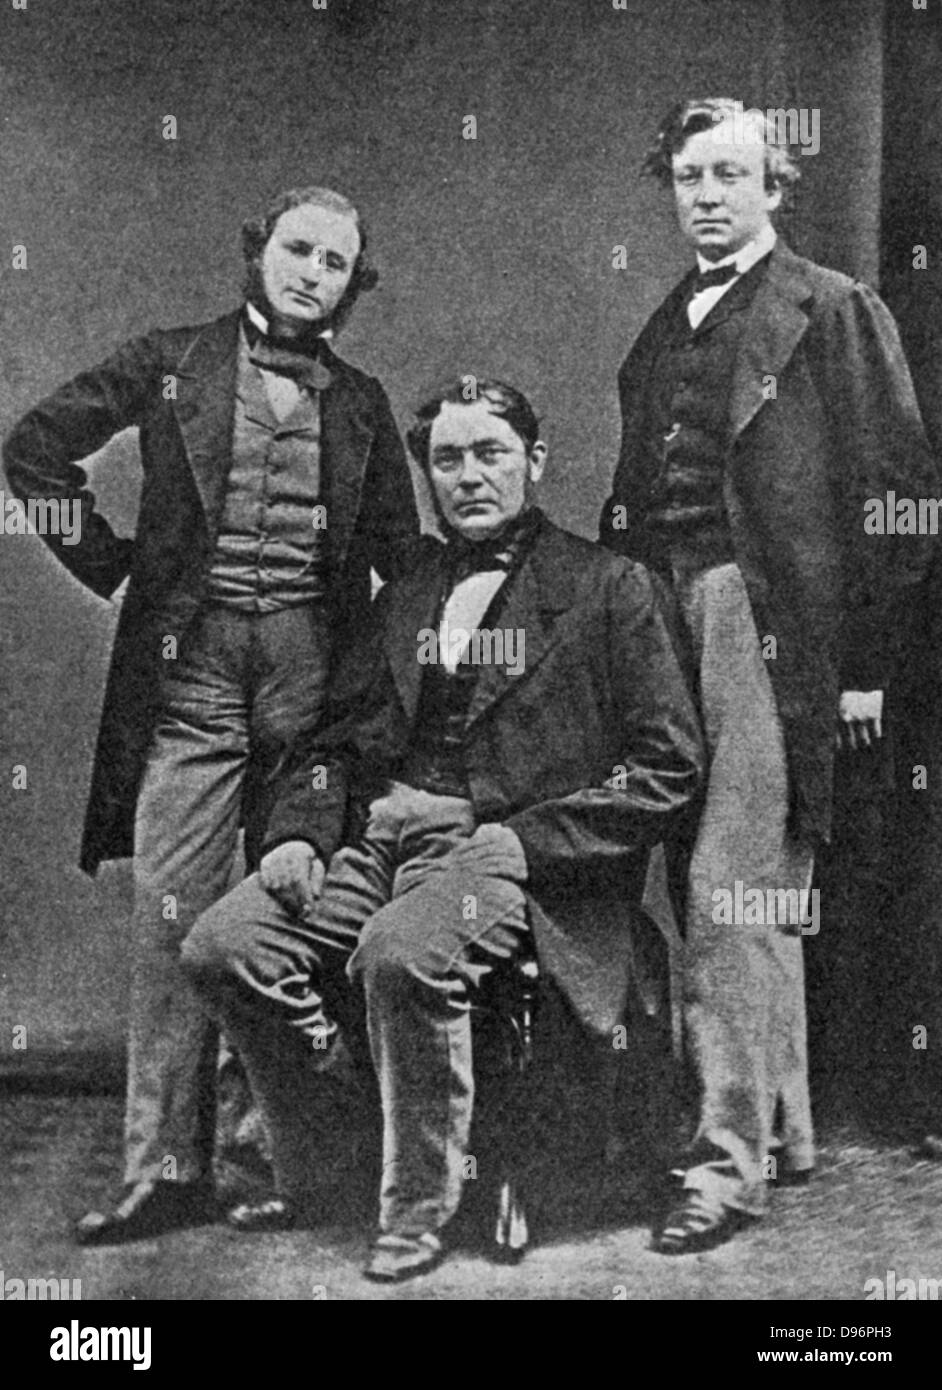 From left to right, chemists and physicists: Kirchhoff, von Bunsen and Roscoe c1860.  Gustave Robert Kirchhoff, German physicist (1824-1887), Robert Wilhelm Eberhard von Bunsen, German Physicist and chemist (1811-1899) and Sir Henry Enfield Roscoe, English Chemist, (1833-1915). From 'History of Chemistry', by Edward Thorpe. (London, 1910). Stock Photo